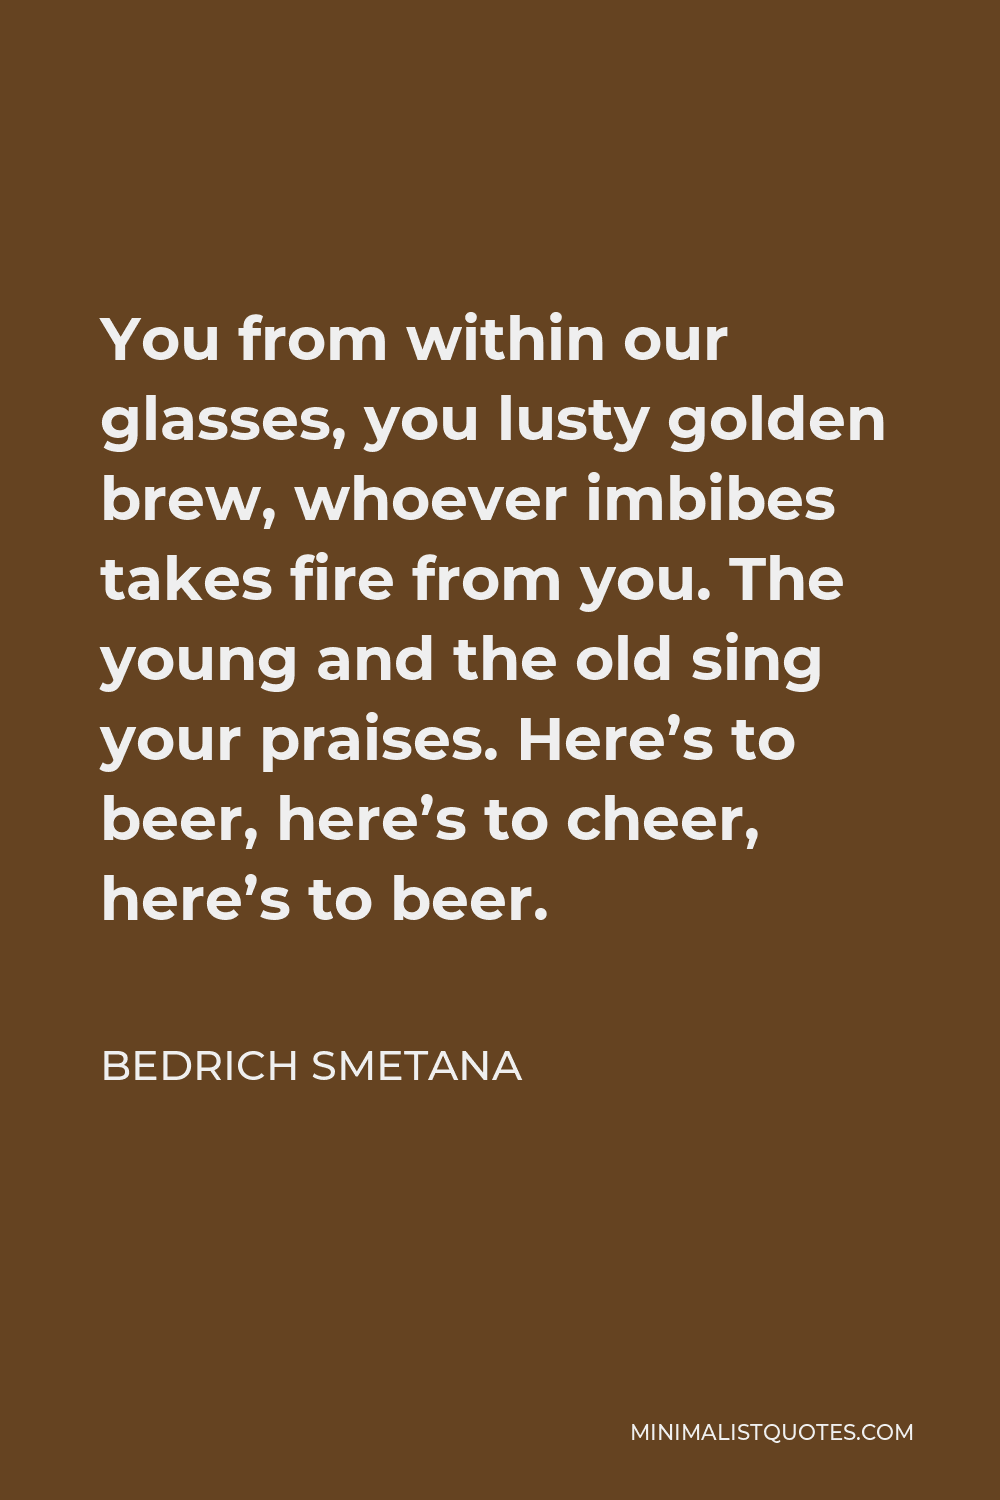 Bedrich Smetana Quote - You from within our glasses, you lusty golden brew, whoever imbibes takes fire from you. The young and the old sing your praises. Here’s to beer, here’s to cheer, here’s to beer.